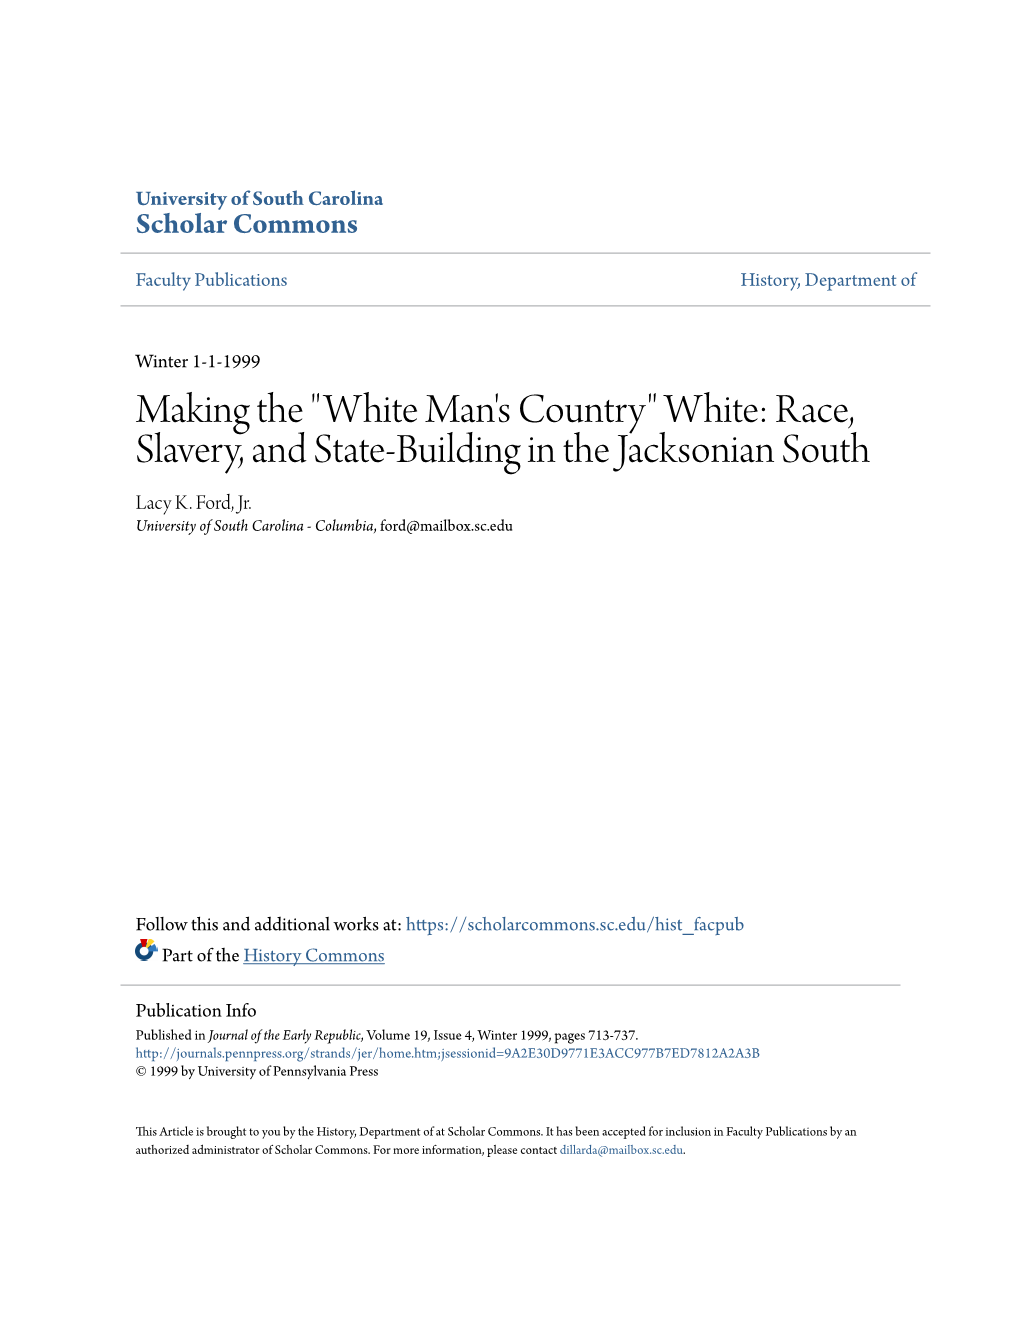 White Man's Country" White: Race, Slavery, and State-Building in the Jacksonian South Lacy K